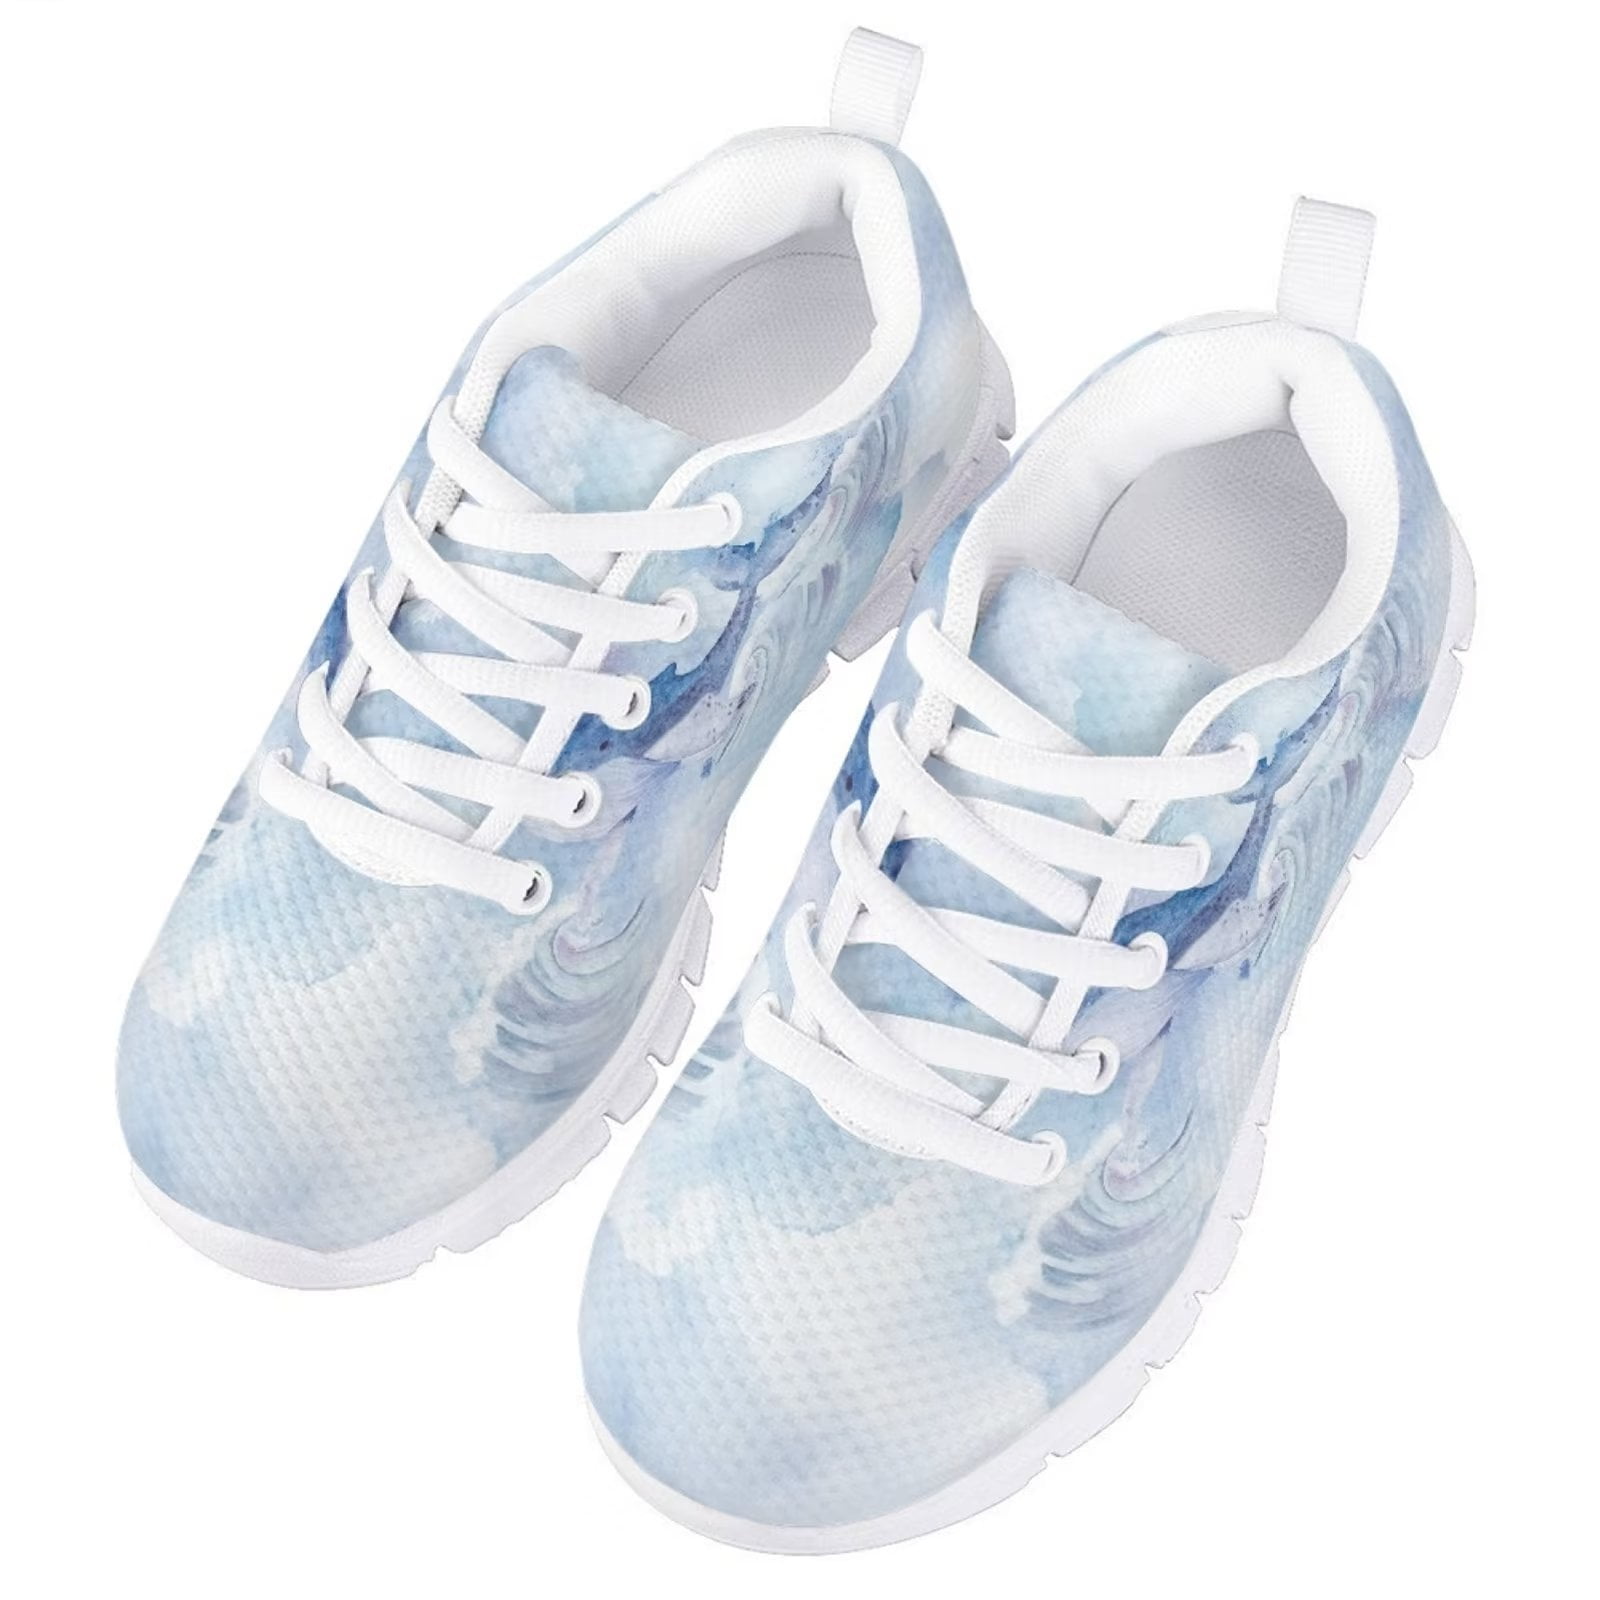 Pzuqiu Penguin Sports Shoes for Girls Size 12 Lightweight Athletic Shoes Casual Walking Shoes Breathable Tennis Shoes Lace Up, Kids Unisex, Blue